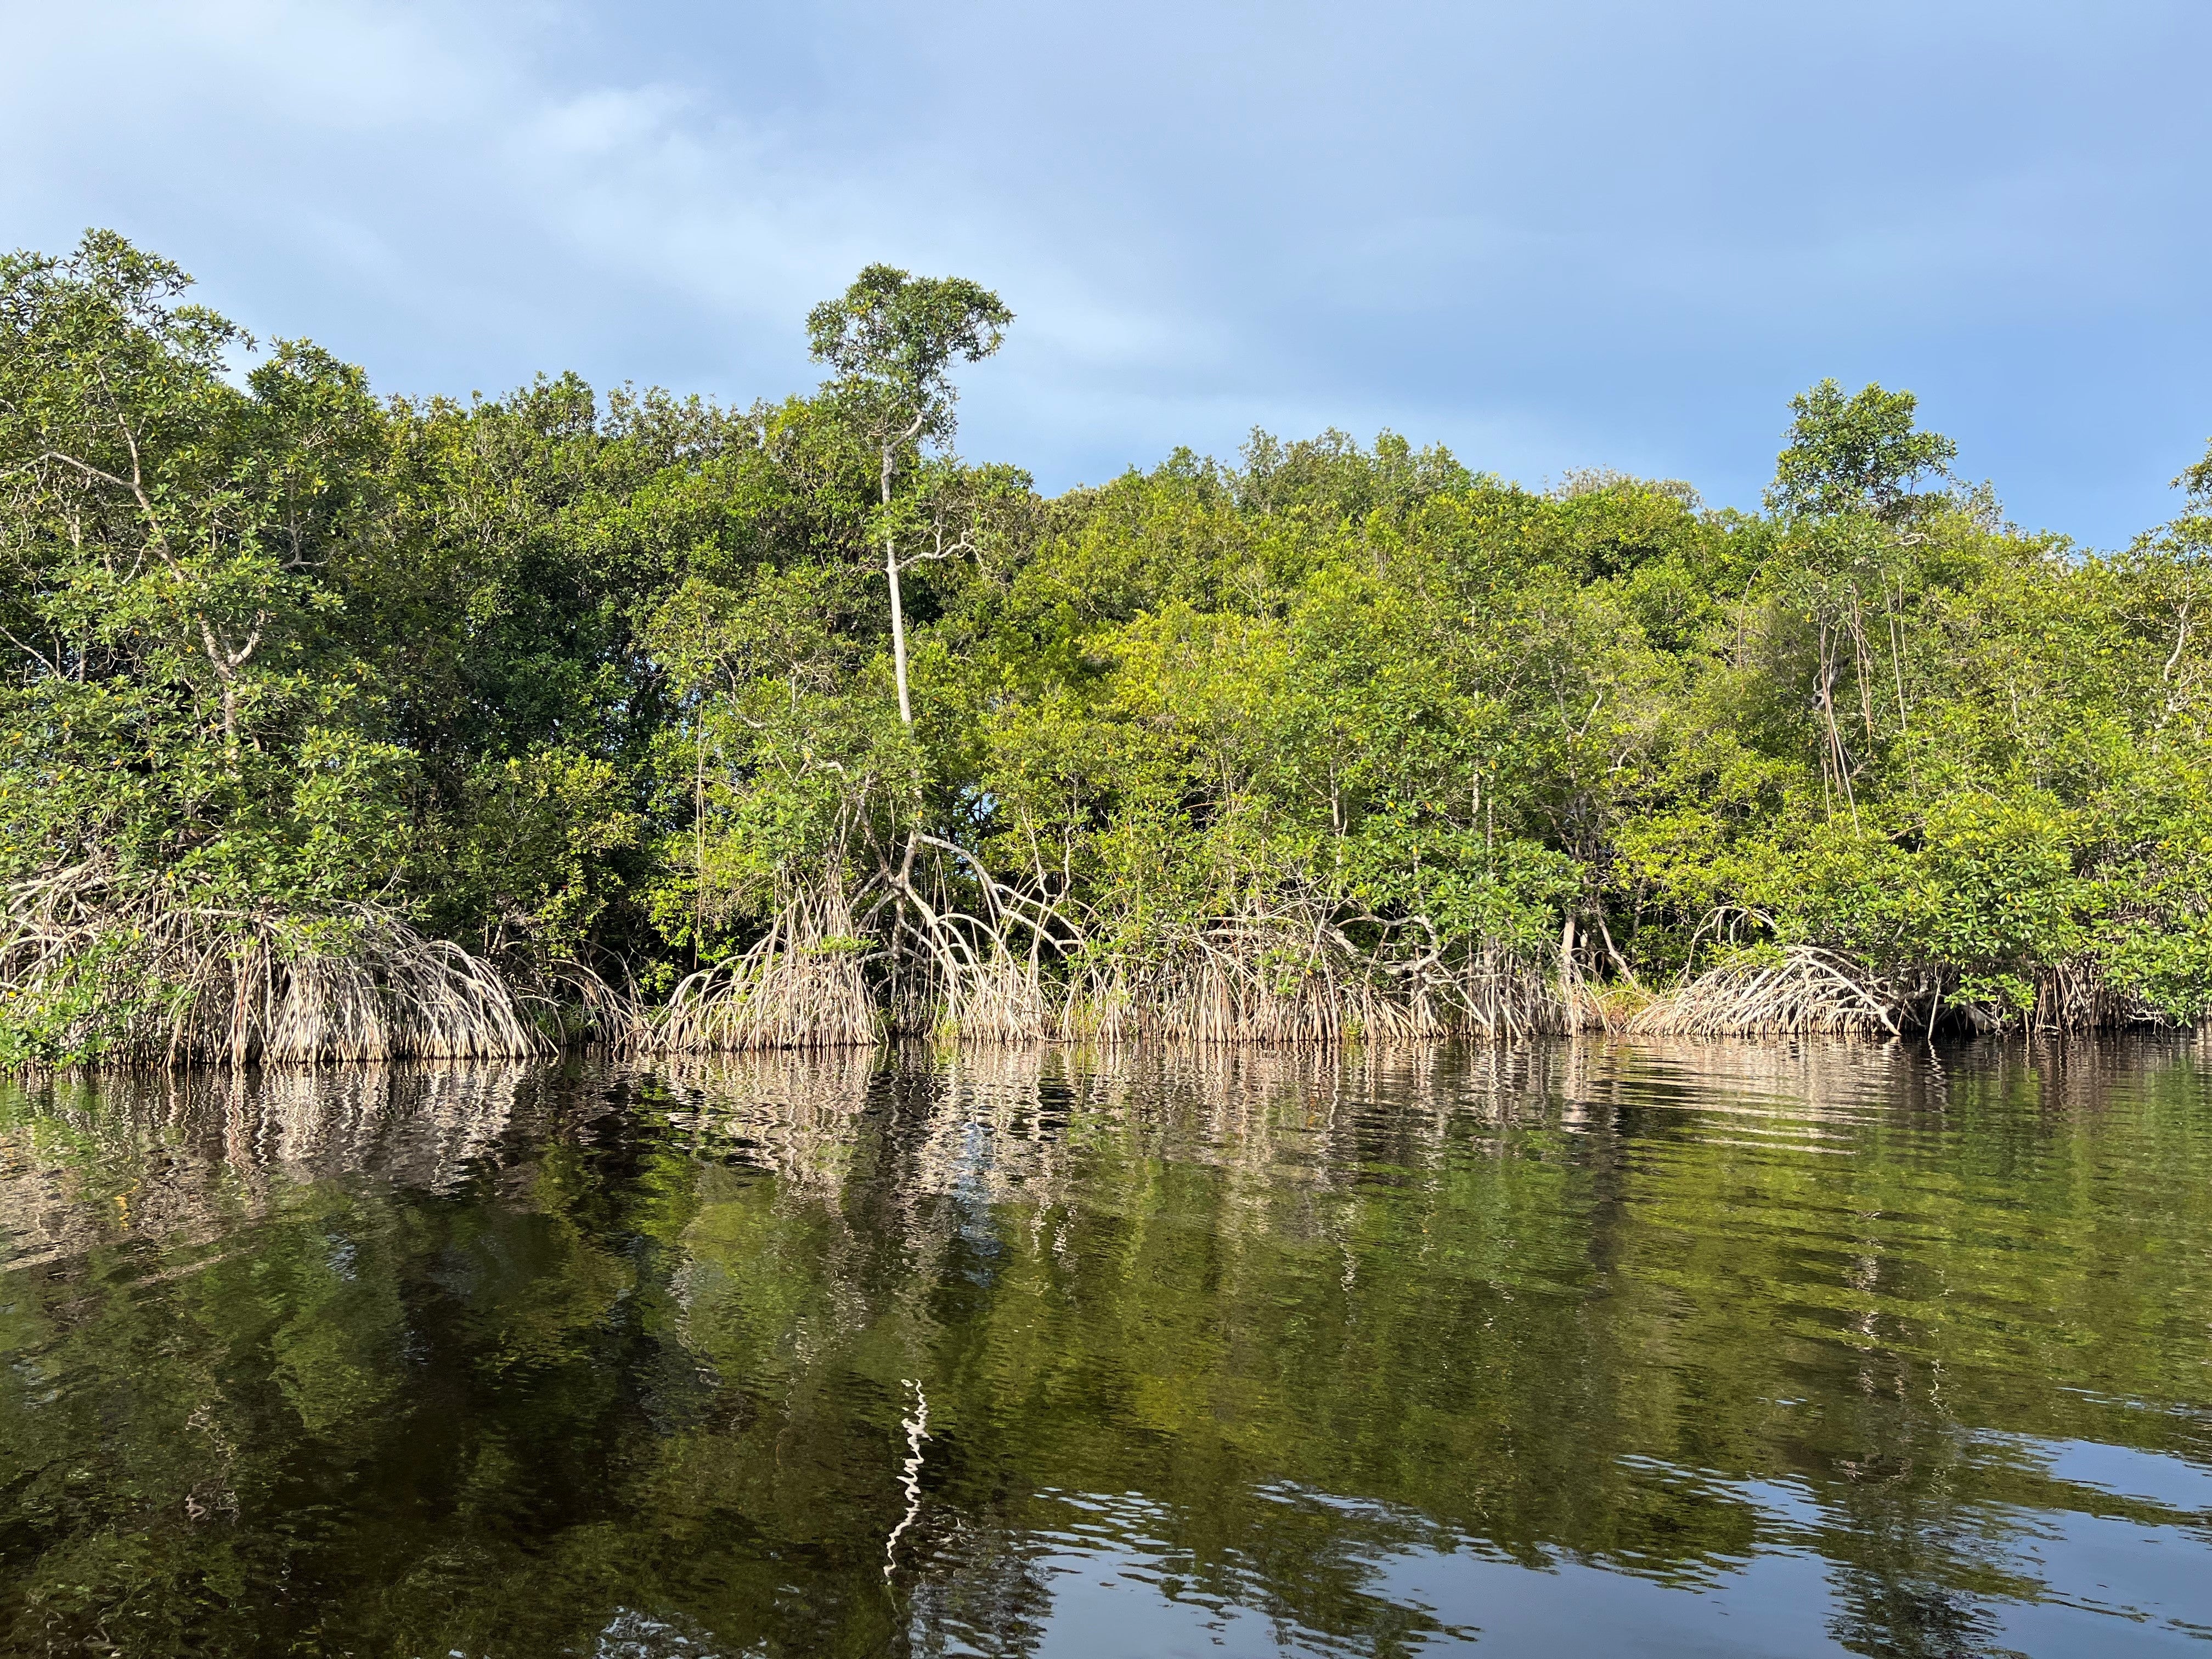 Gabon’s mangroves are also an important carbo store (Emily Beament/PA)